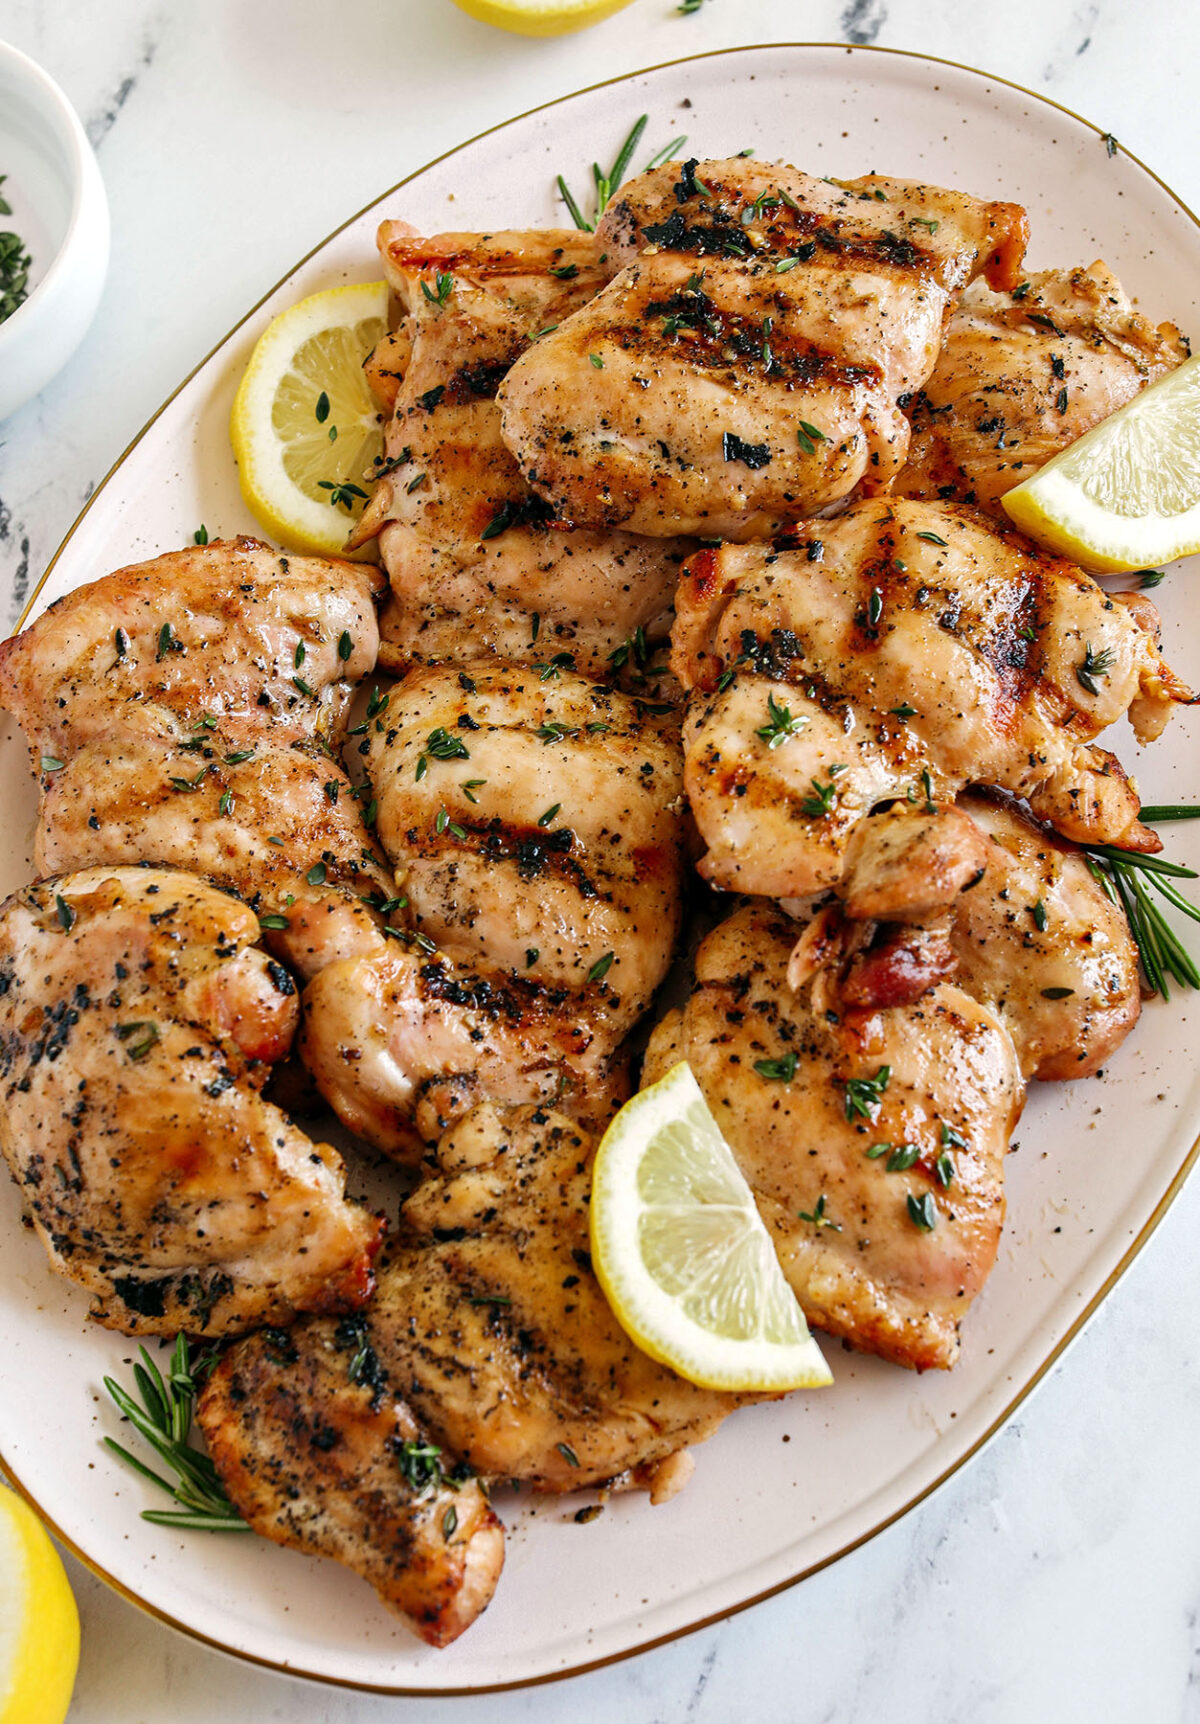 This Lemon Herb Grilled Chicken is easily made with just a few simple ingredients for a delicious, healthy meal!  Packed with so much flavor thanks to tangy lemon juice, tons of garlic, and fresh thyme!